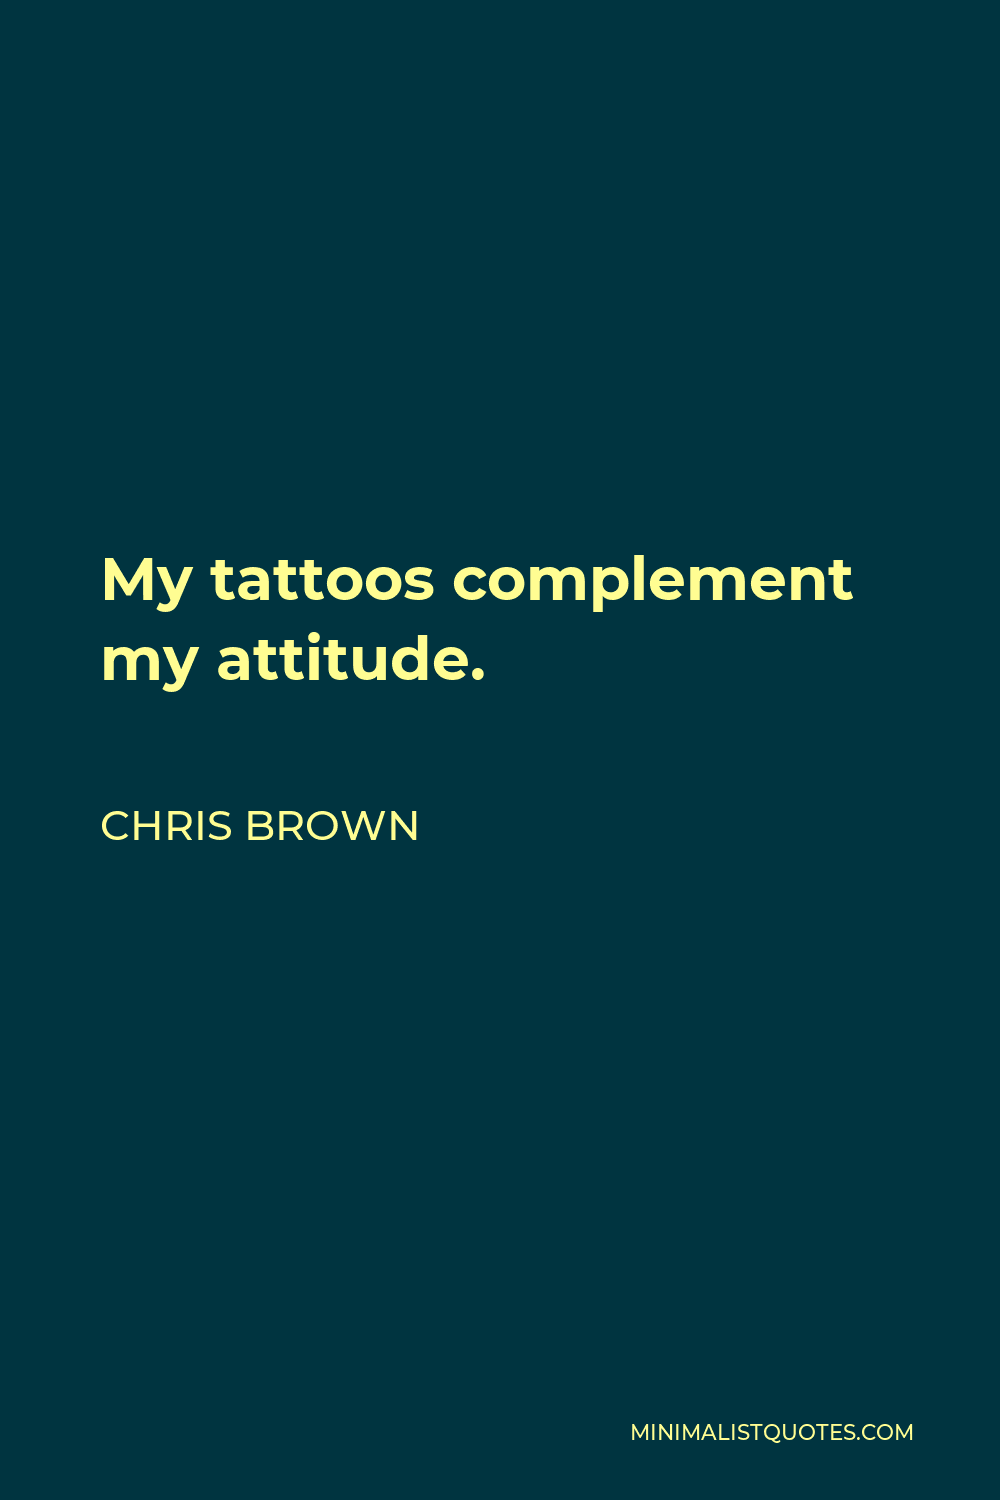 Chris Brown Quote: My tattoos complement my attitude.